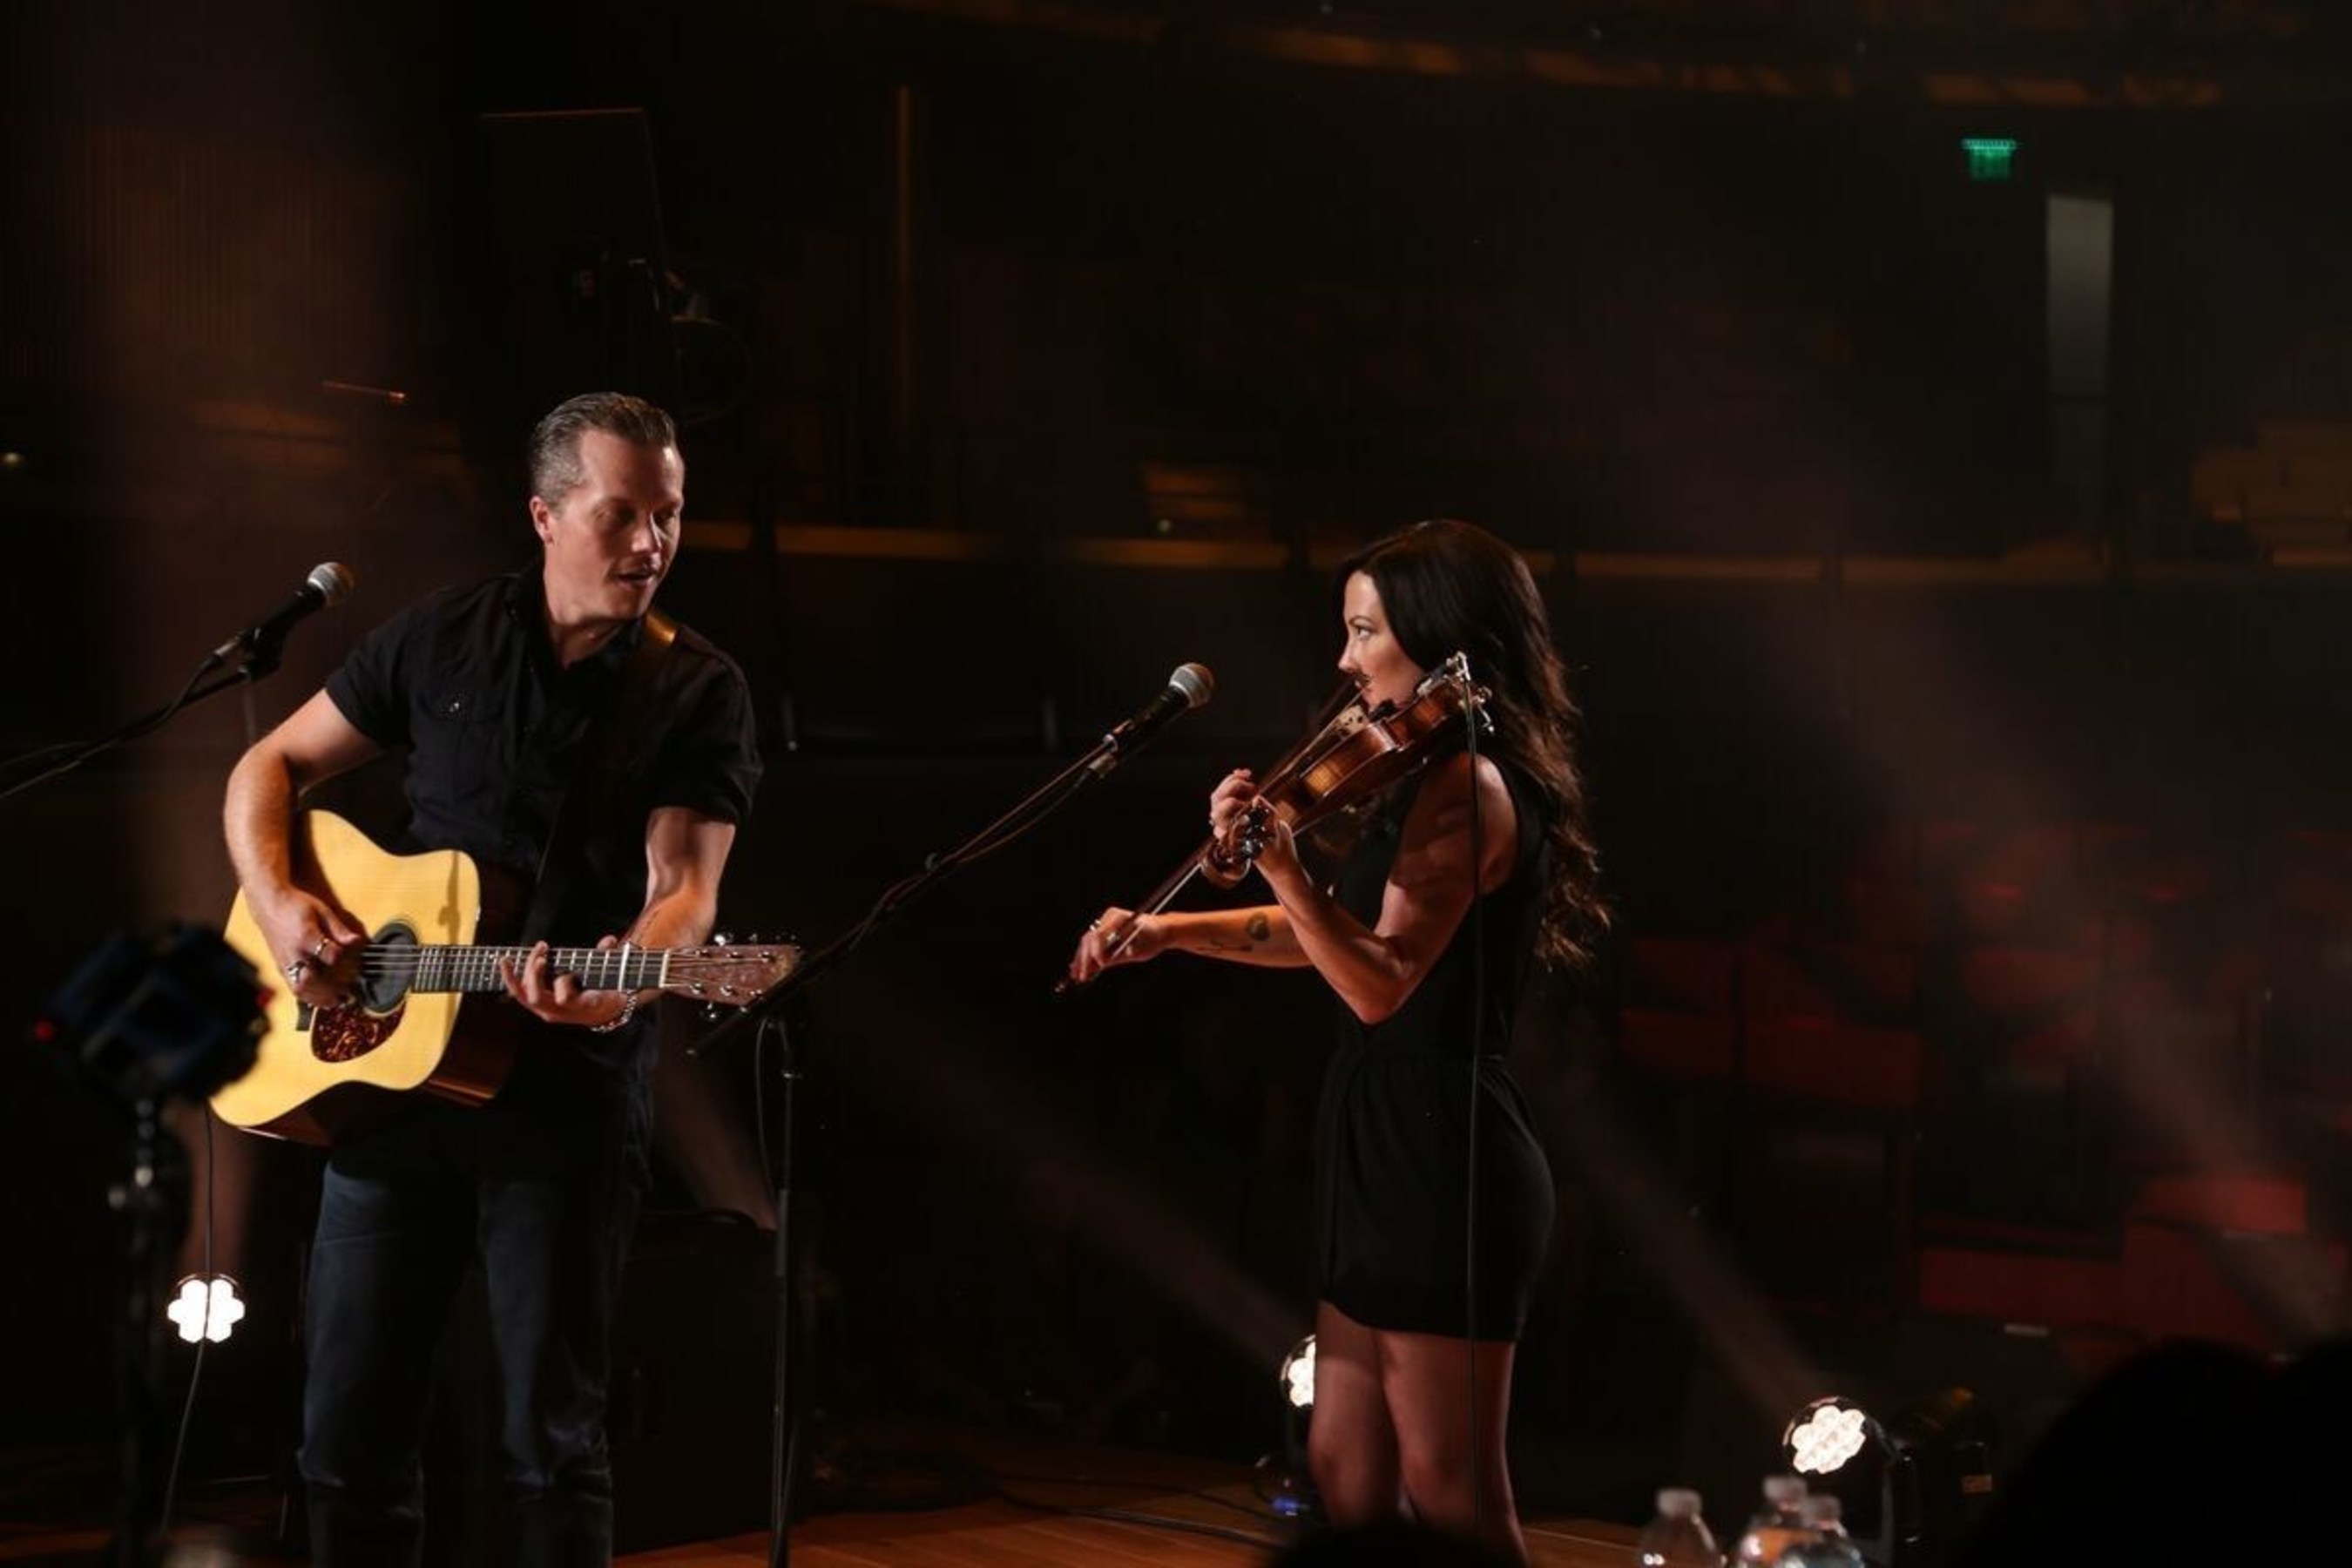 GRAMMY winning Jason Isbell and wife Amanda Shires perform a live streamed concert for Chicago's Congress Park